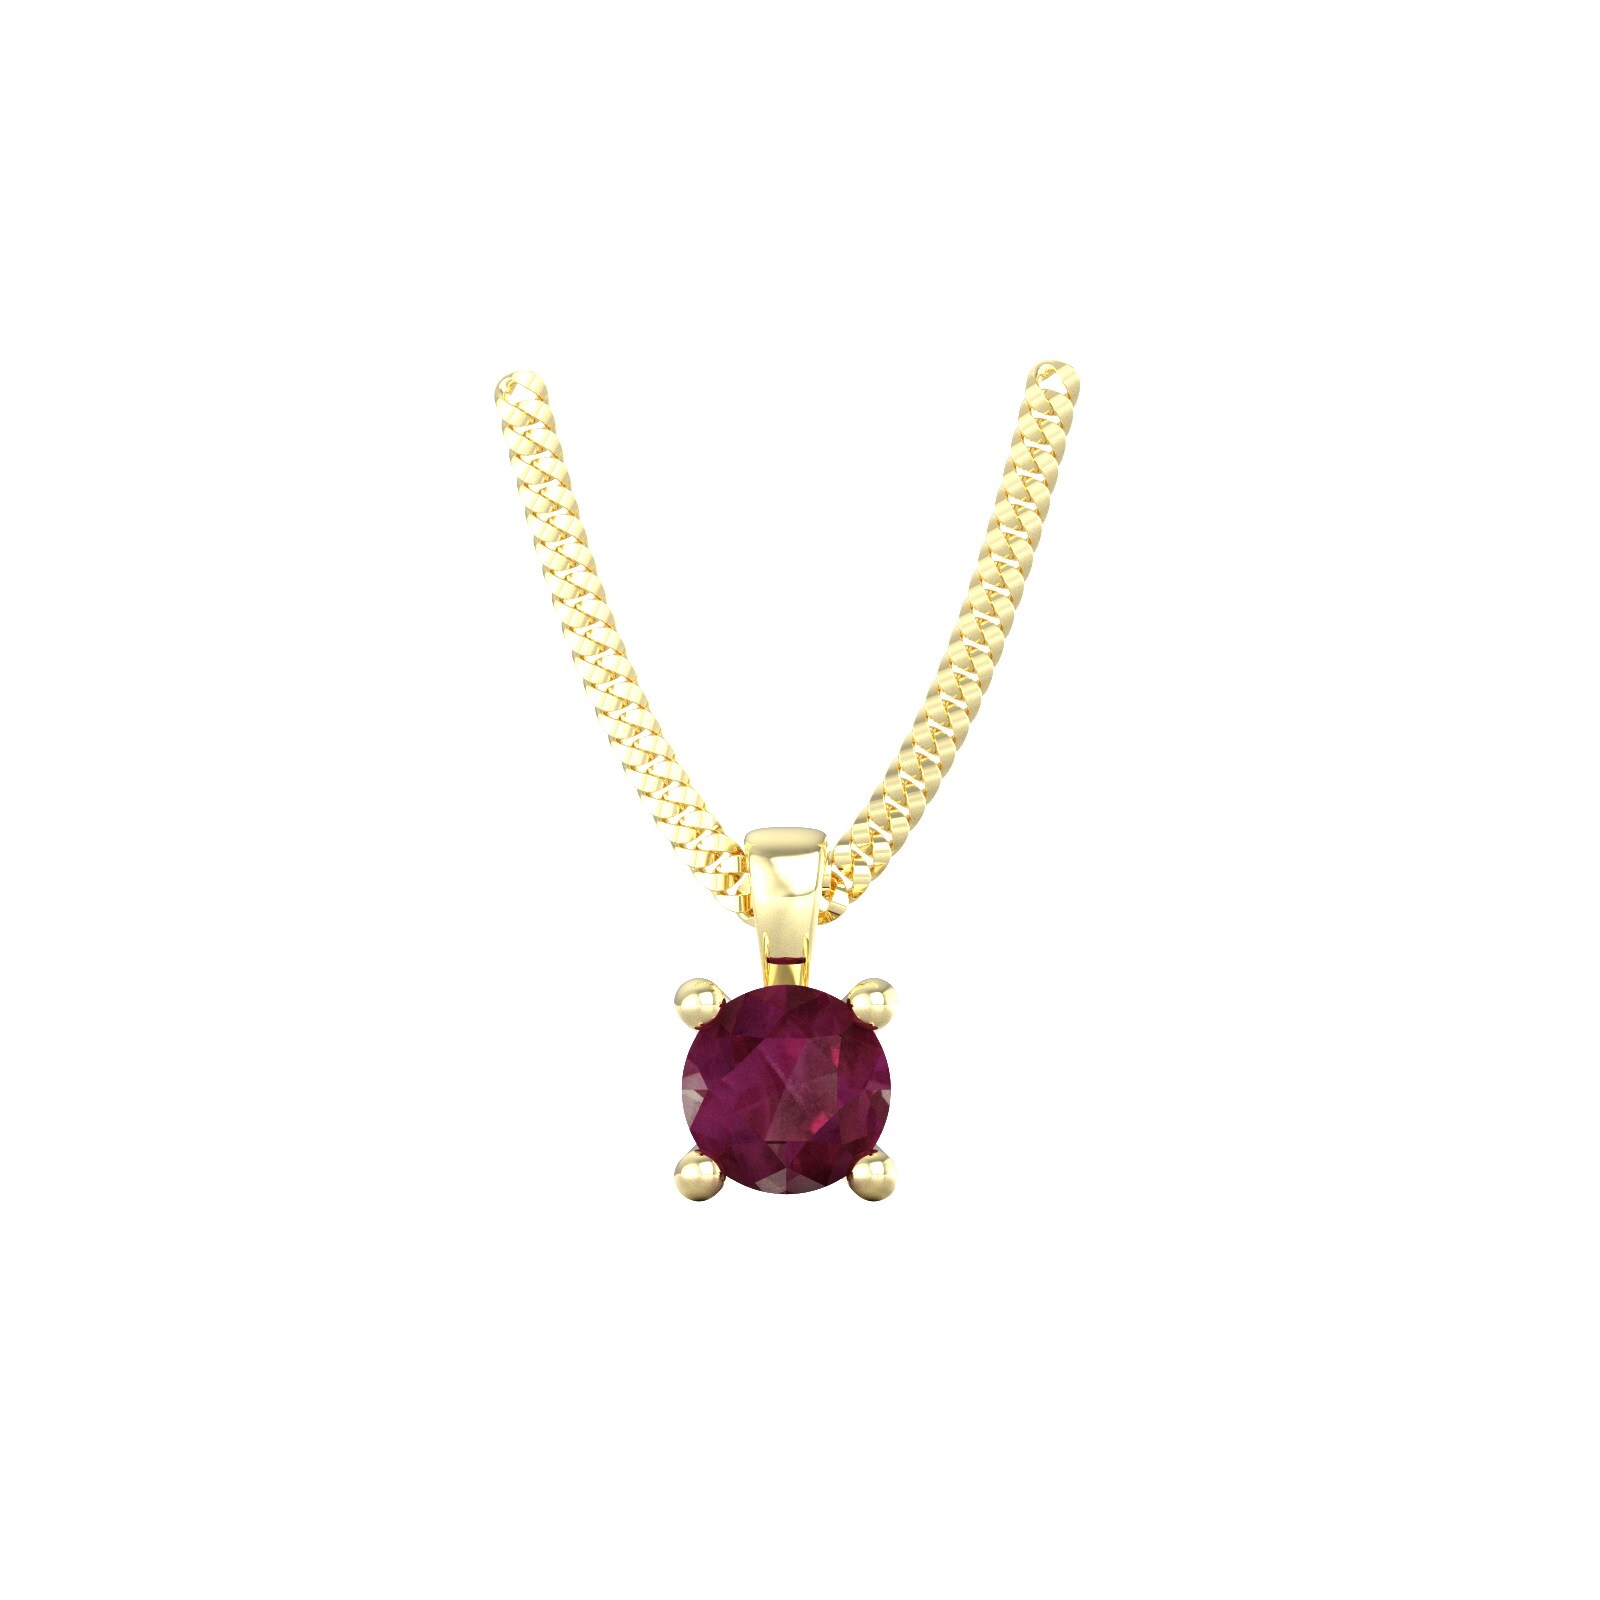 9ct Yellow Gold 4 Claw Ruby Pendant & Chain